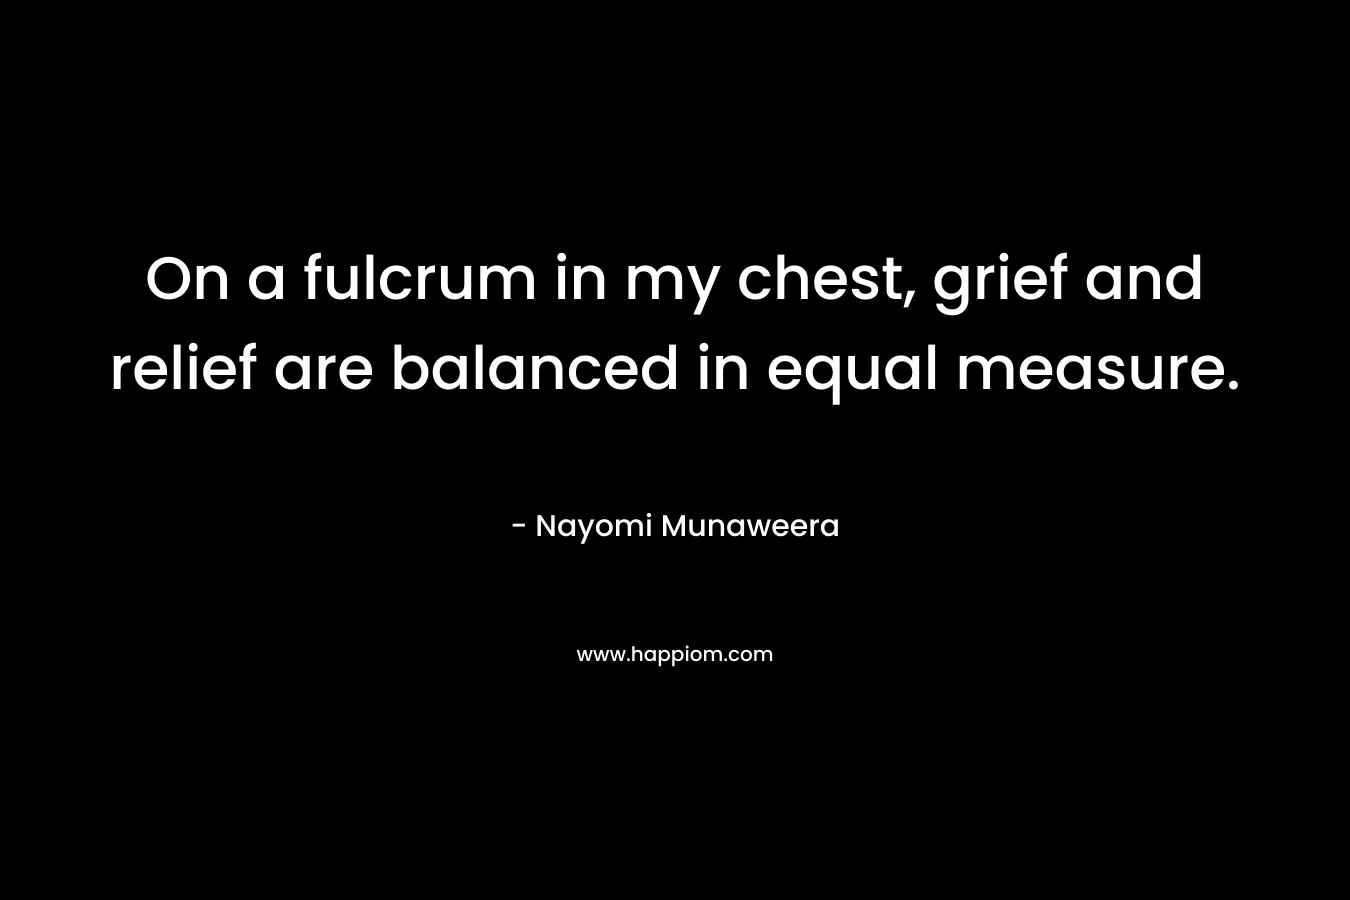 On a fulcrum in my chest, grief and relief are balanced in equal measure.